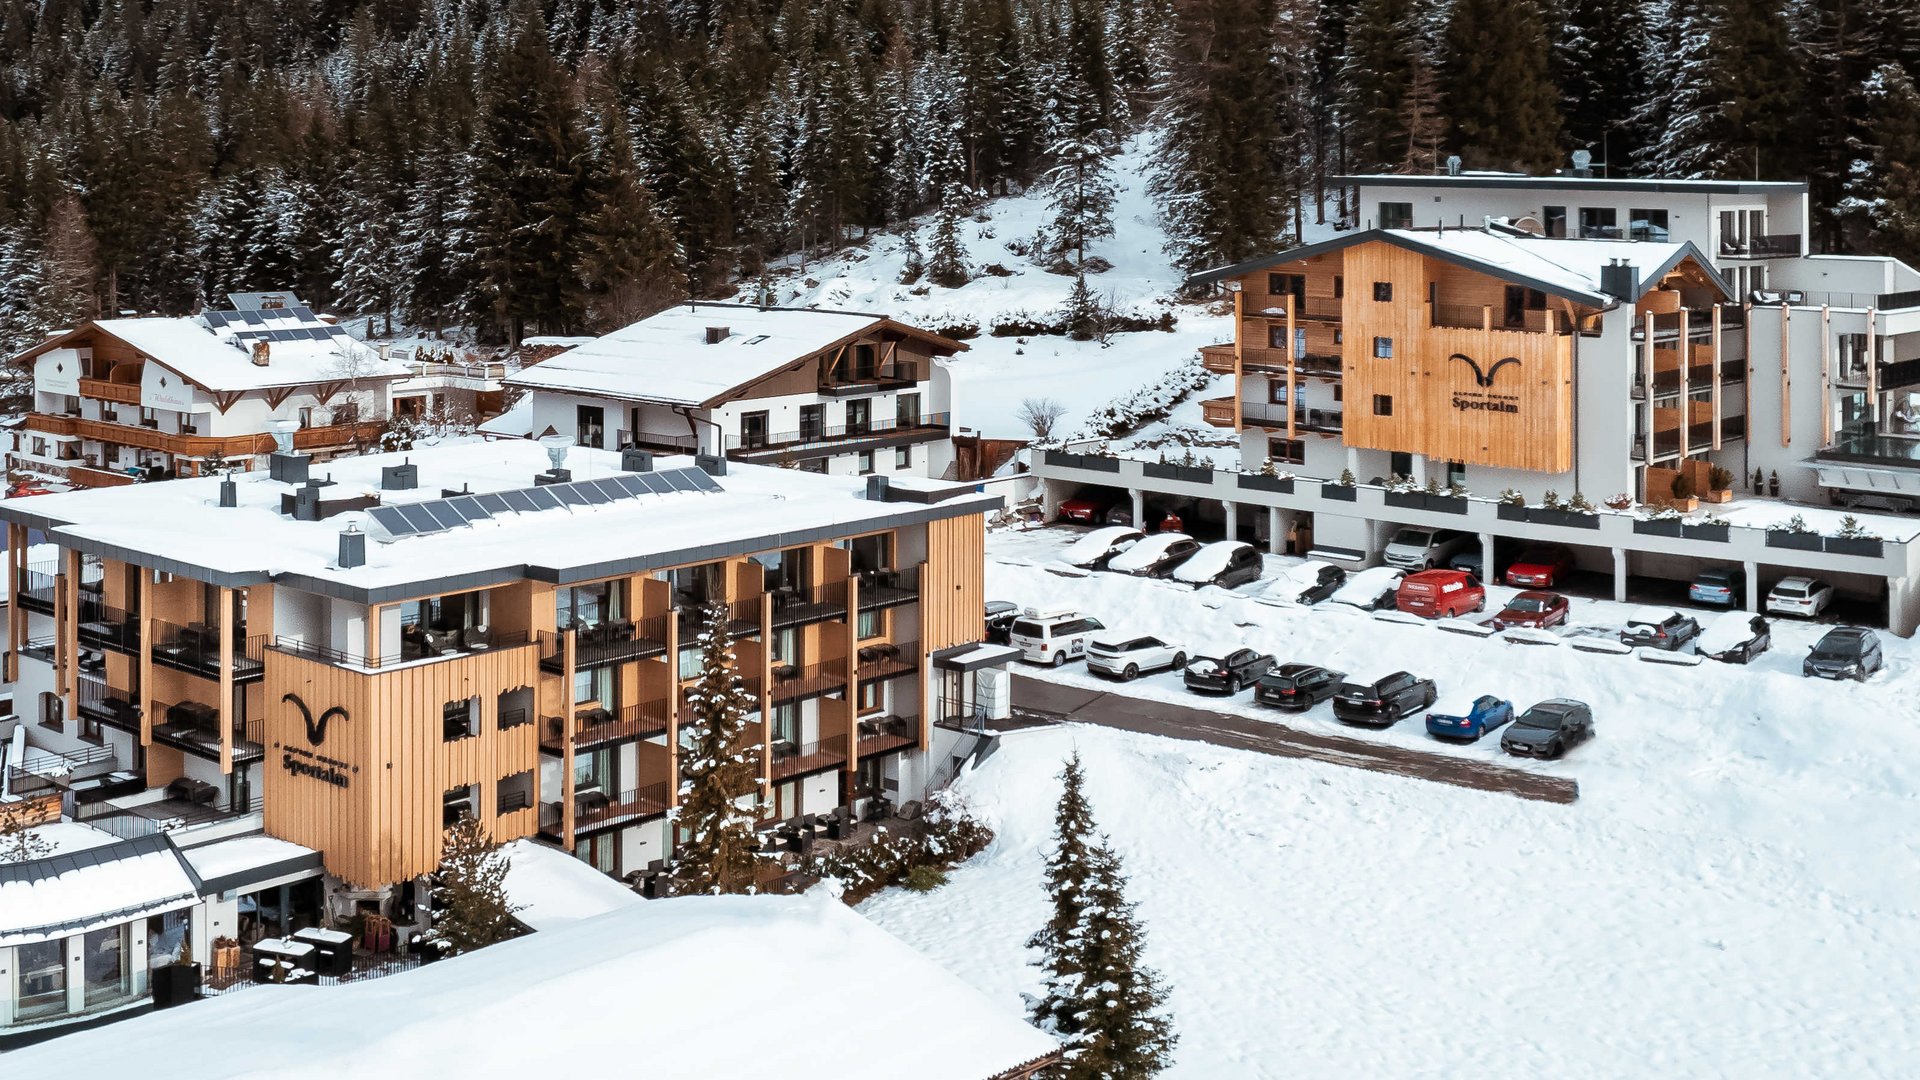 Our family-run hotel in Pitztal